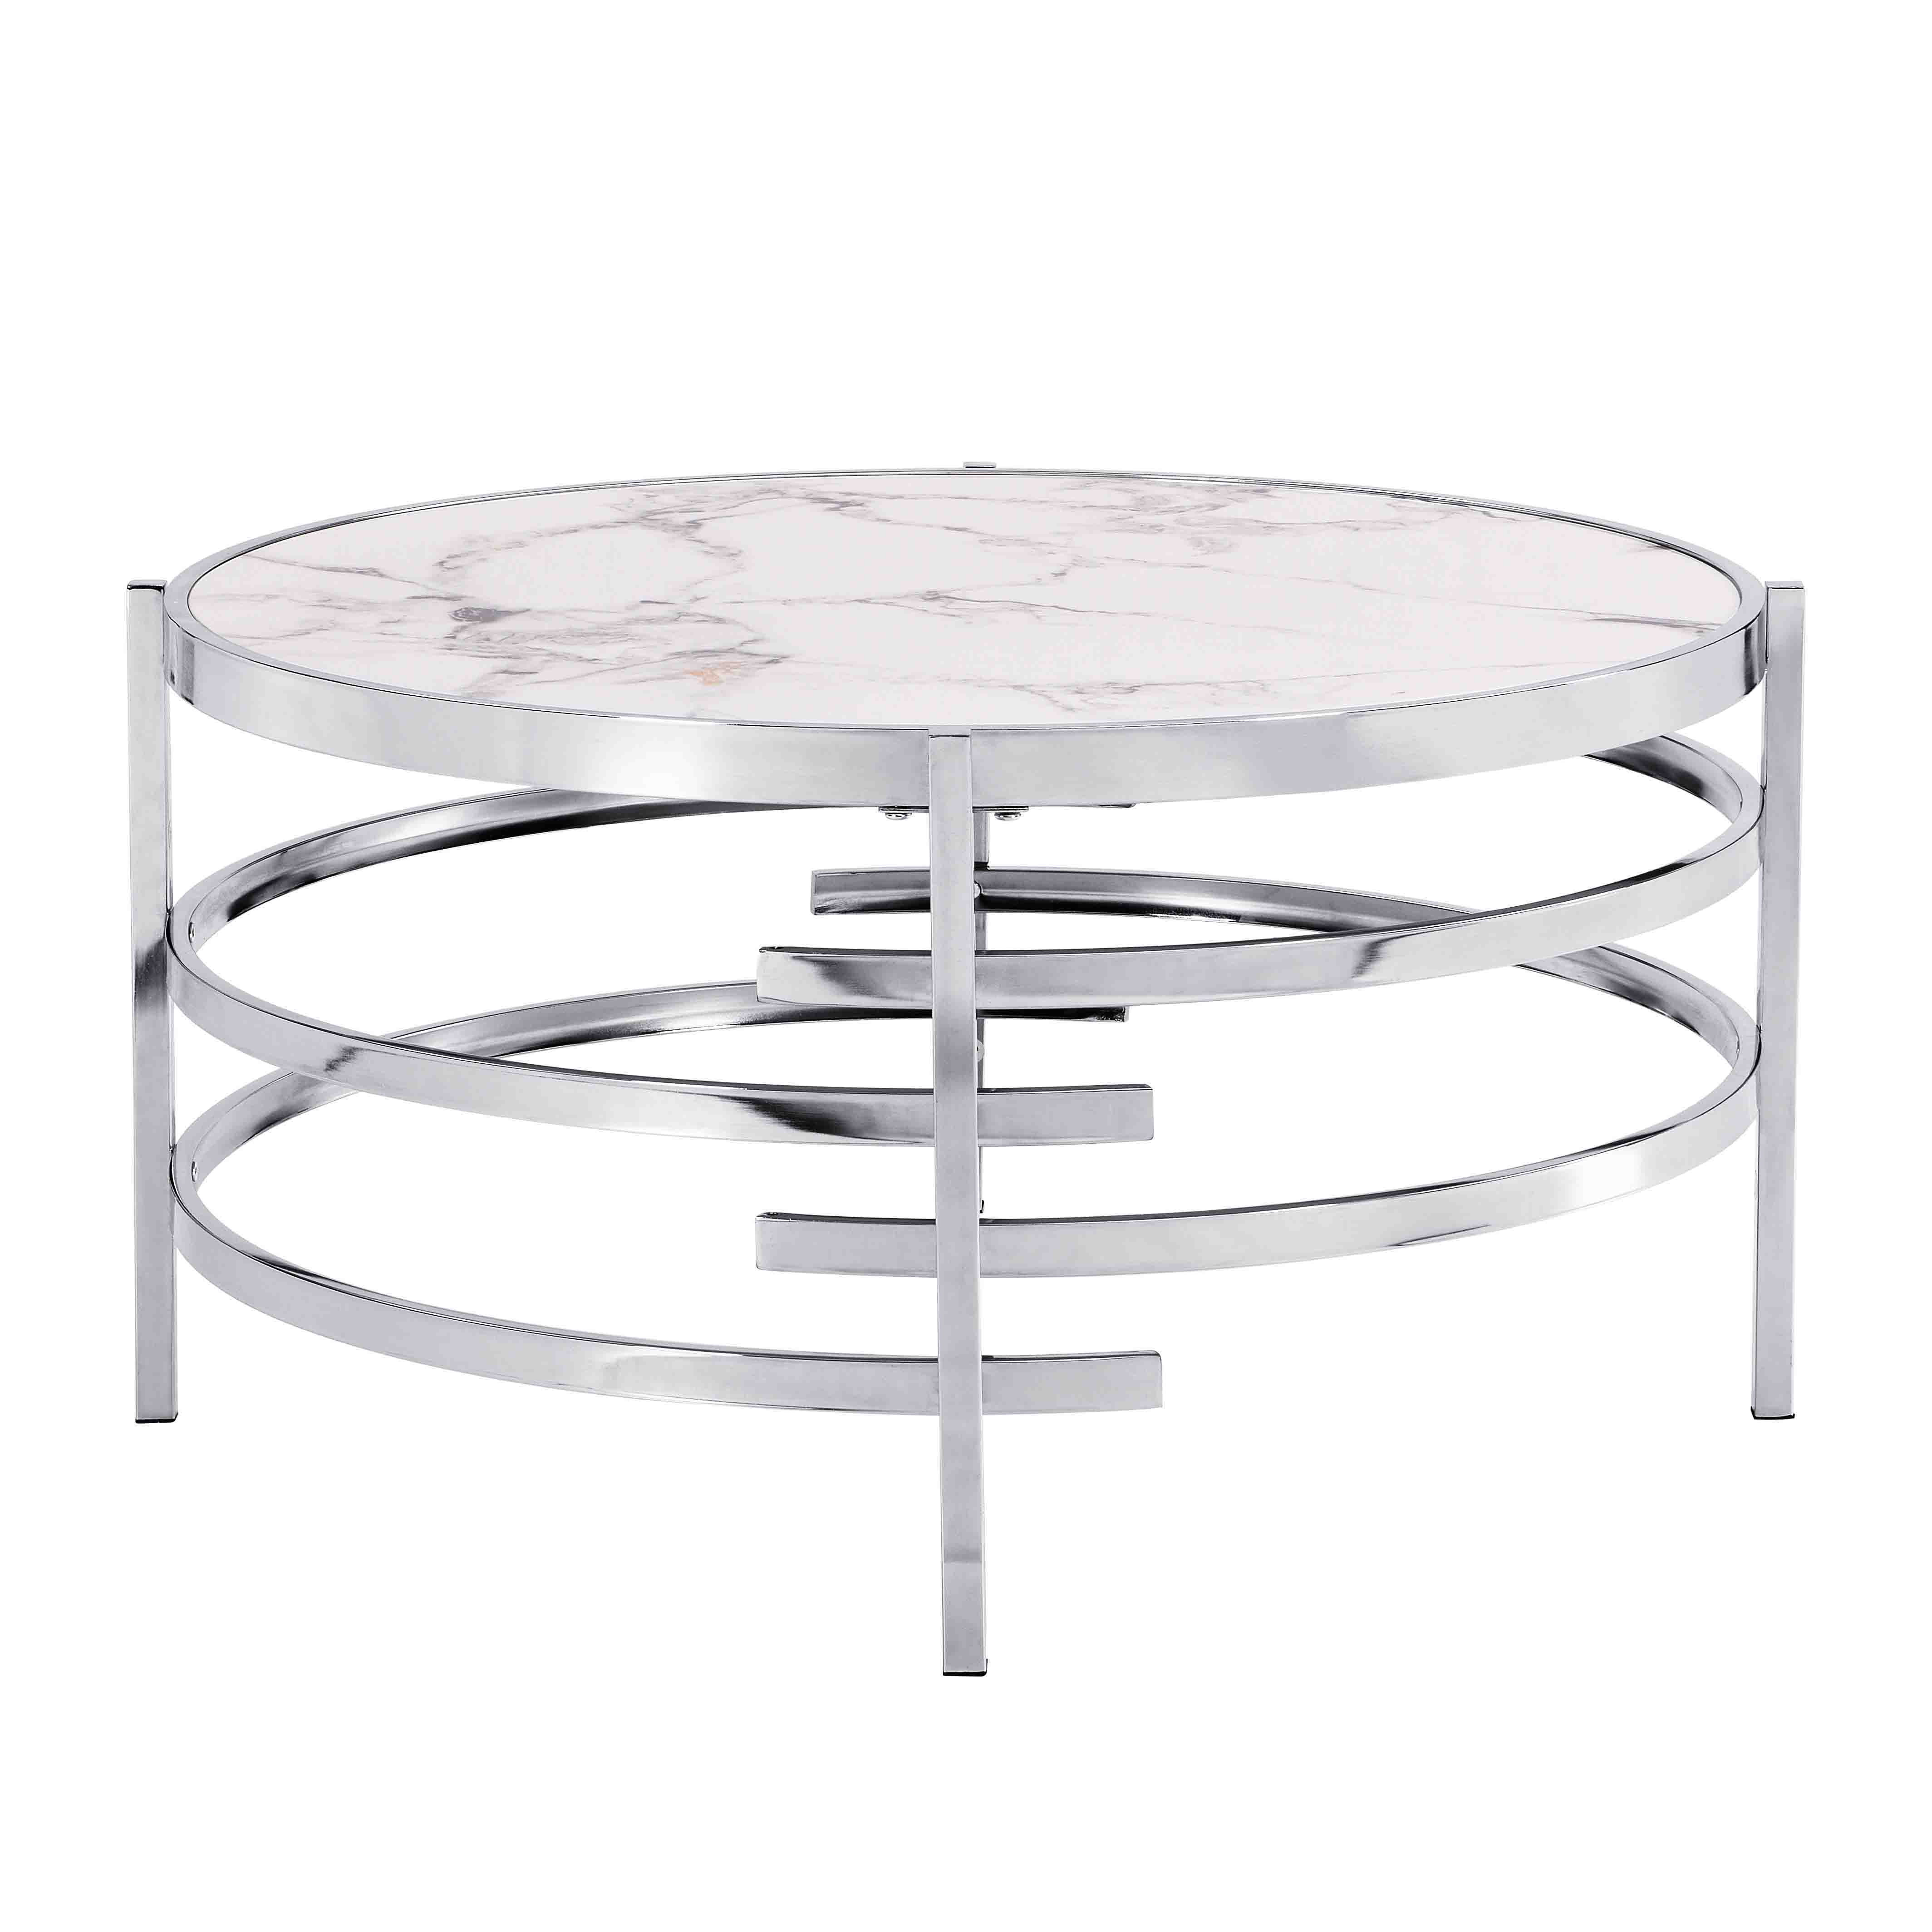 Chrome Round Coffee Table With Sintered Stone Top&Sturdy Metal Frame, Modern Coffee Table For Living Room, Silver